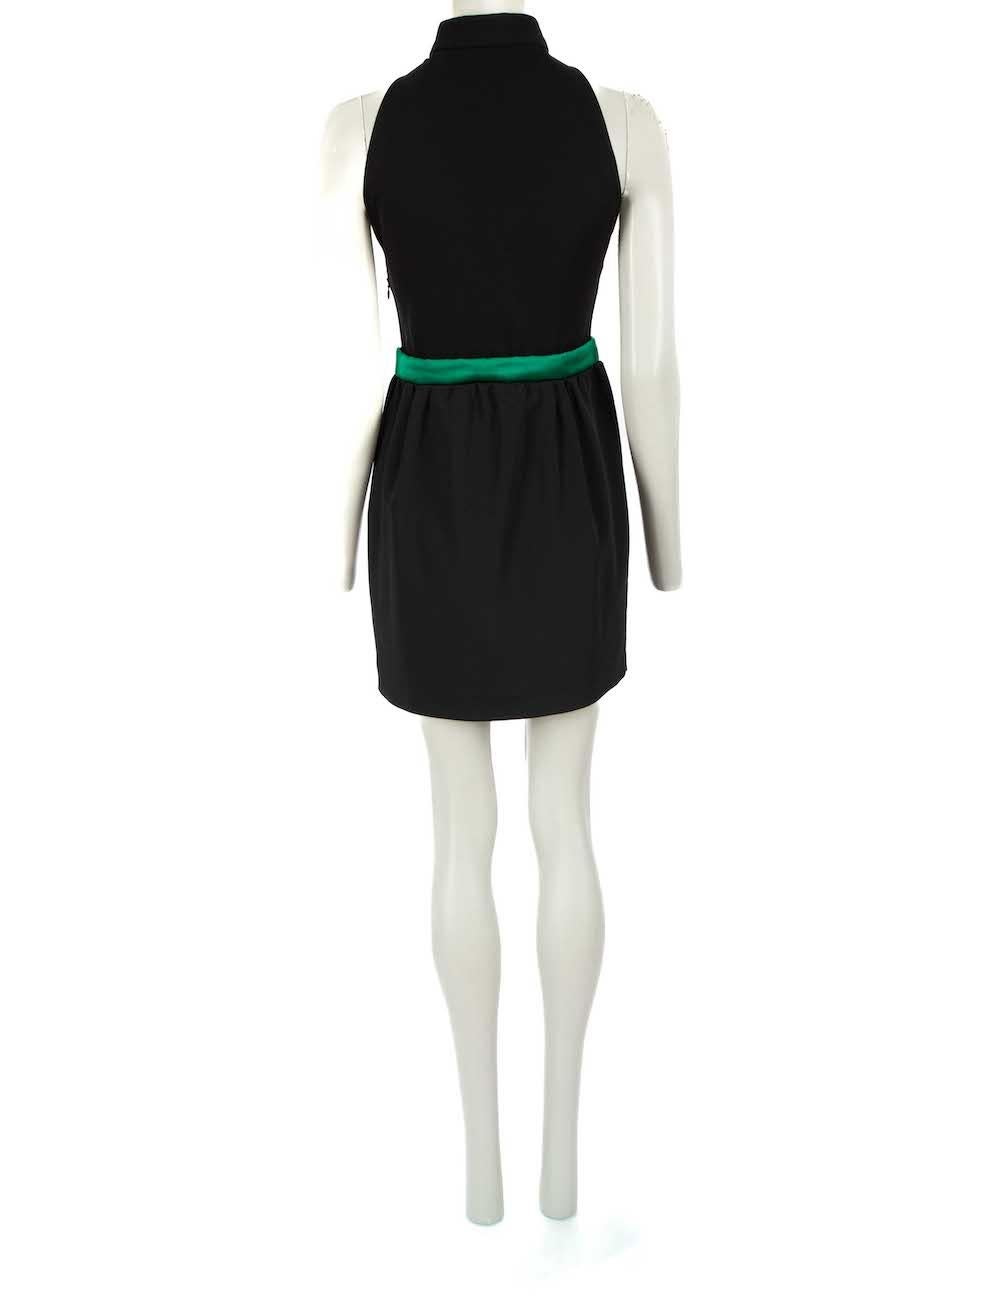 Balenciaga Black Mini Sleeveless Dress Size M In Excellent Condition For Sale In London, GB